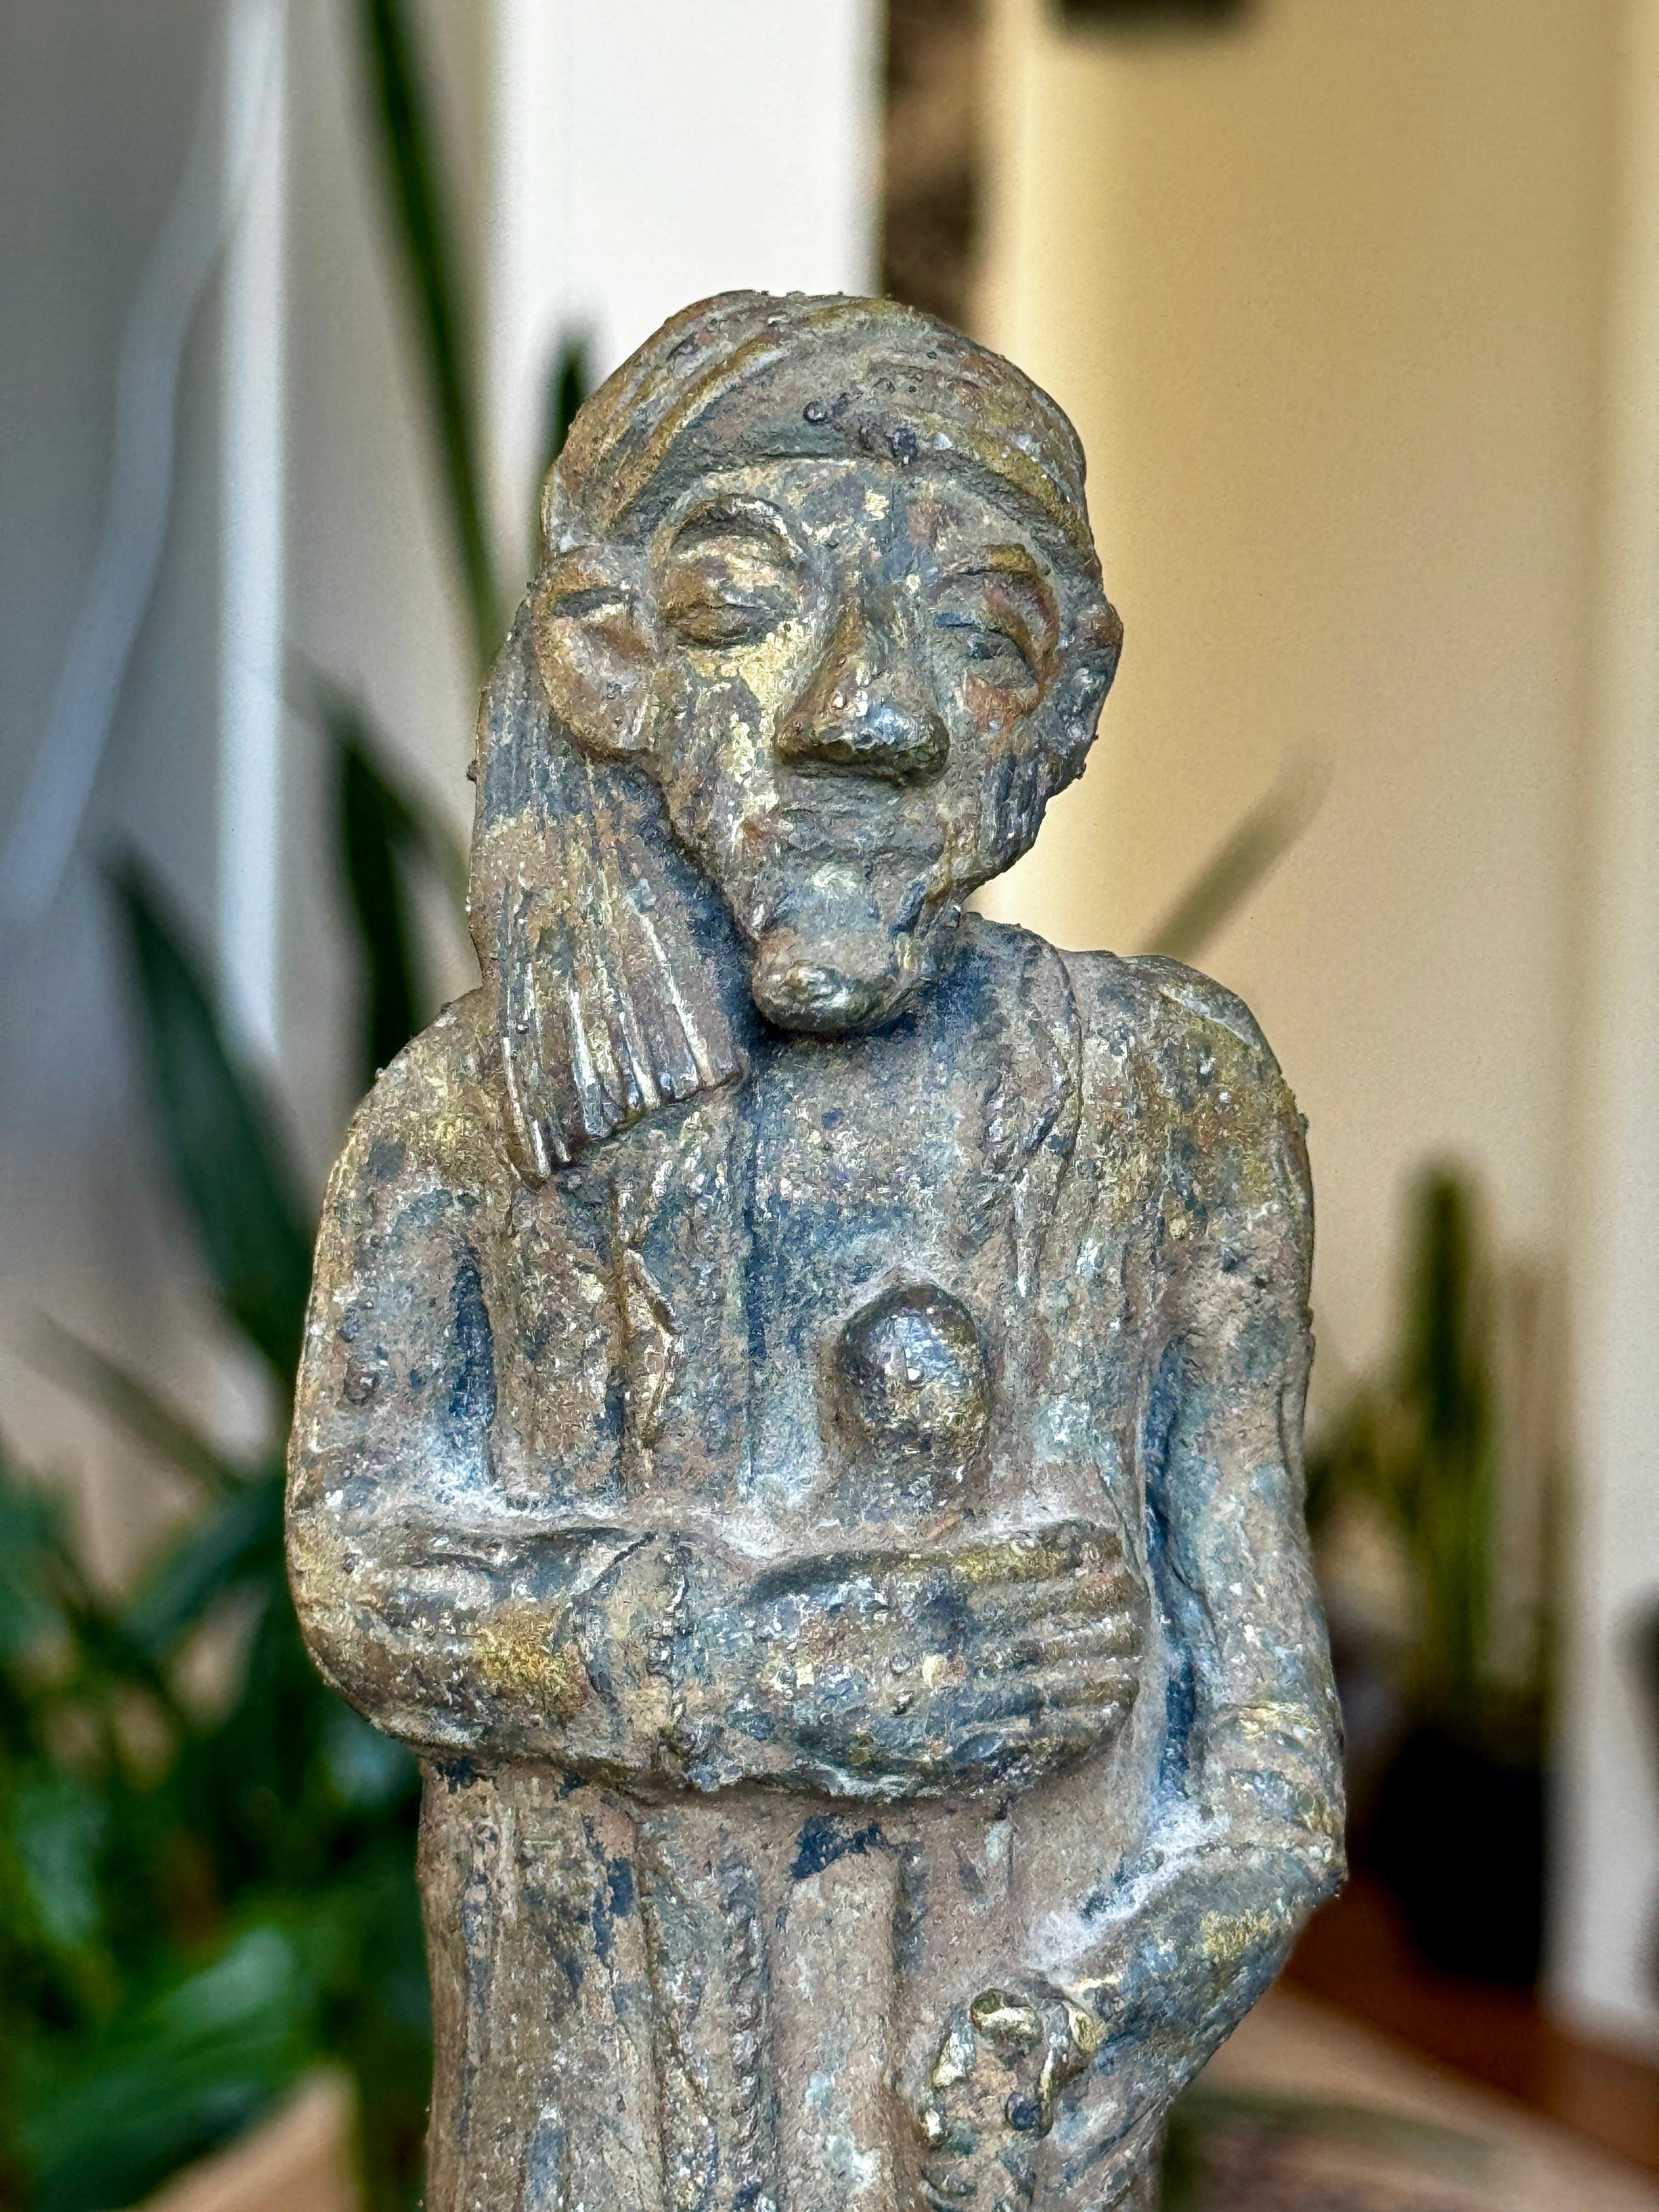 Early 20th Century Metal Figure of Man With Turban

Wood base

Possibly Middle-eastern

7.5